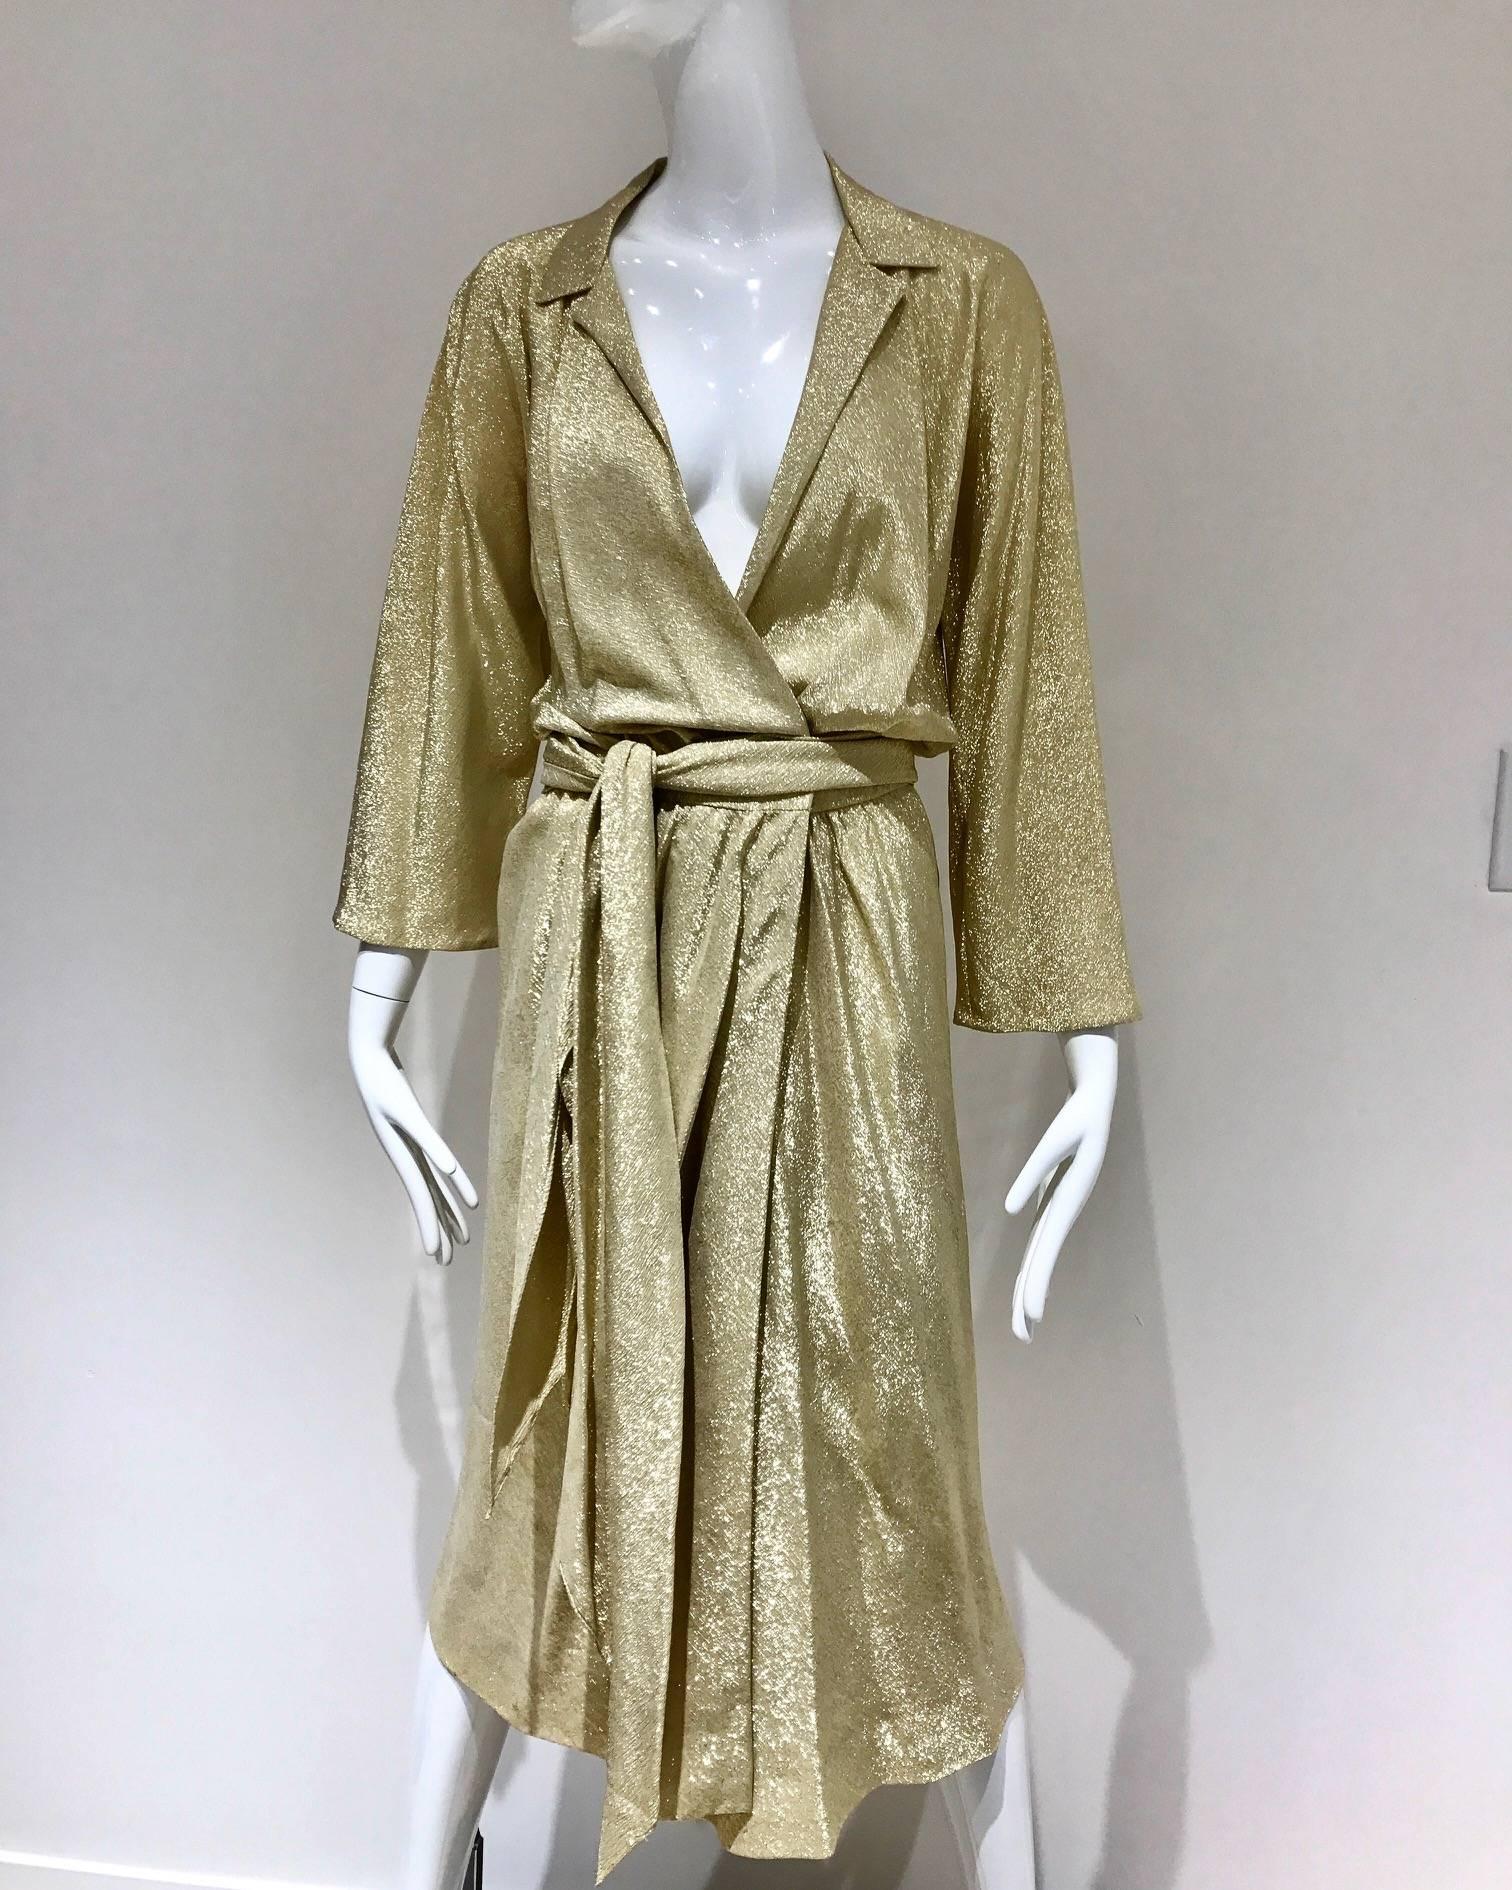 Iconic HALSTON 1970's gold silk lame wrap cocktail disco.  The gold metallic fabric wraps you in sparkling elegance and you will feel like you are going to Studio 54 that evening! The plunging v-neck and clingy draping creates a sexy look that will